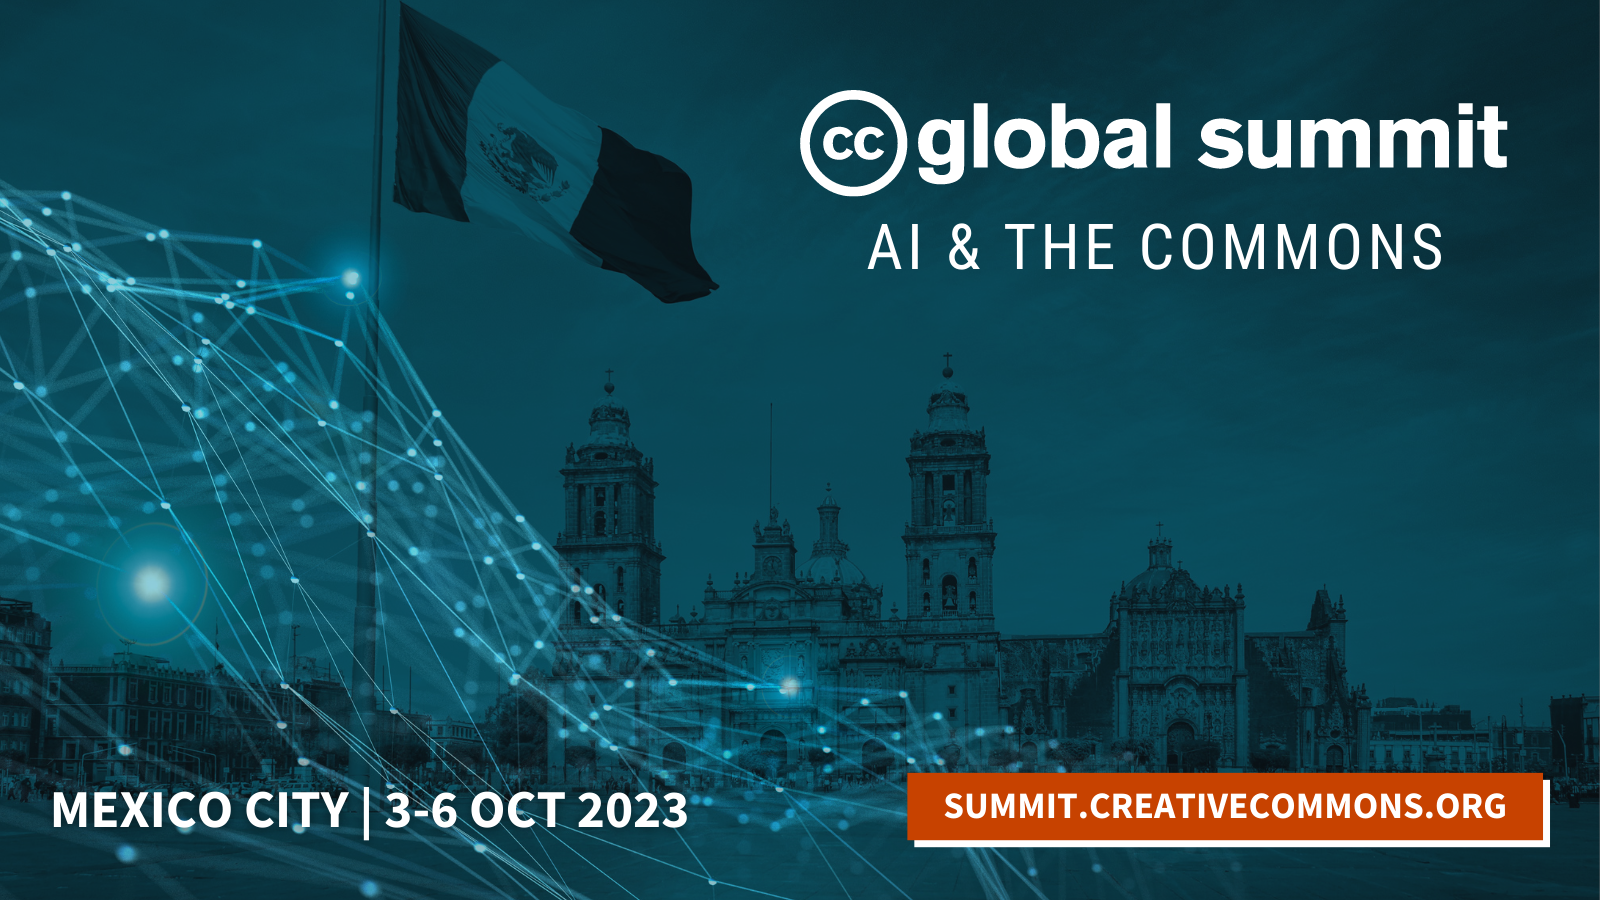 2023 CC Global Summit Registration, Call for Proposals, and